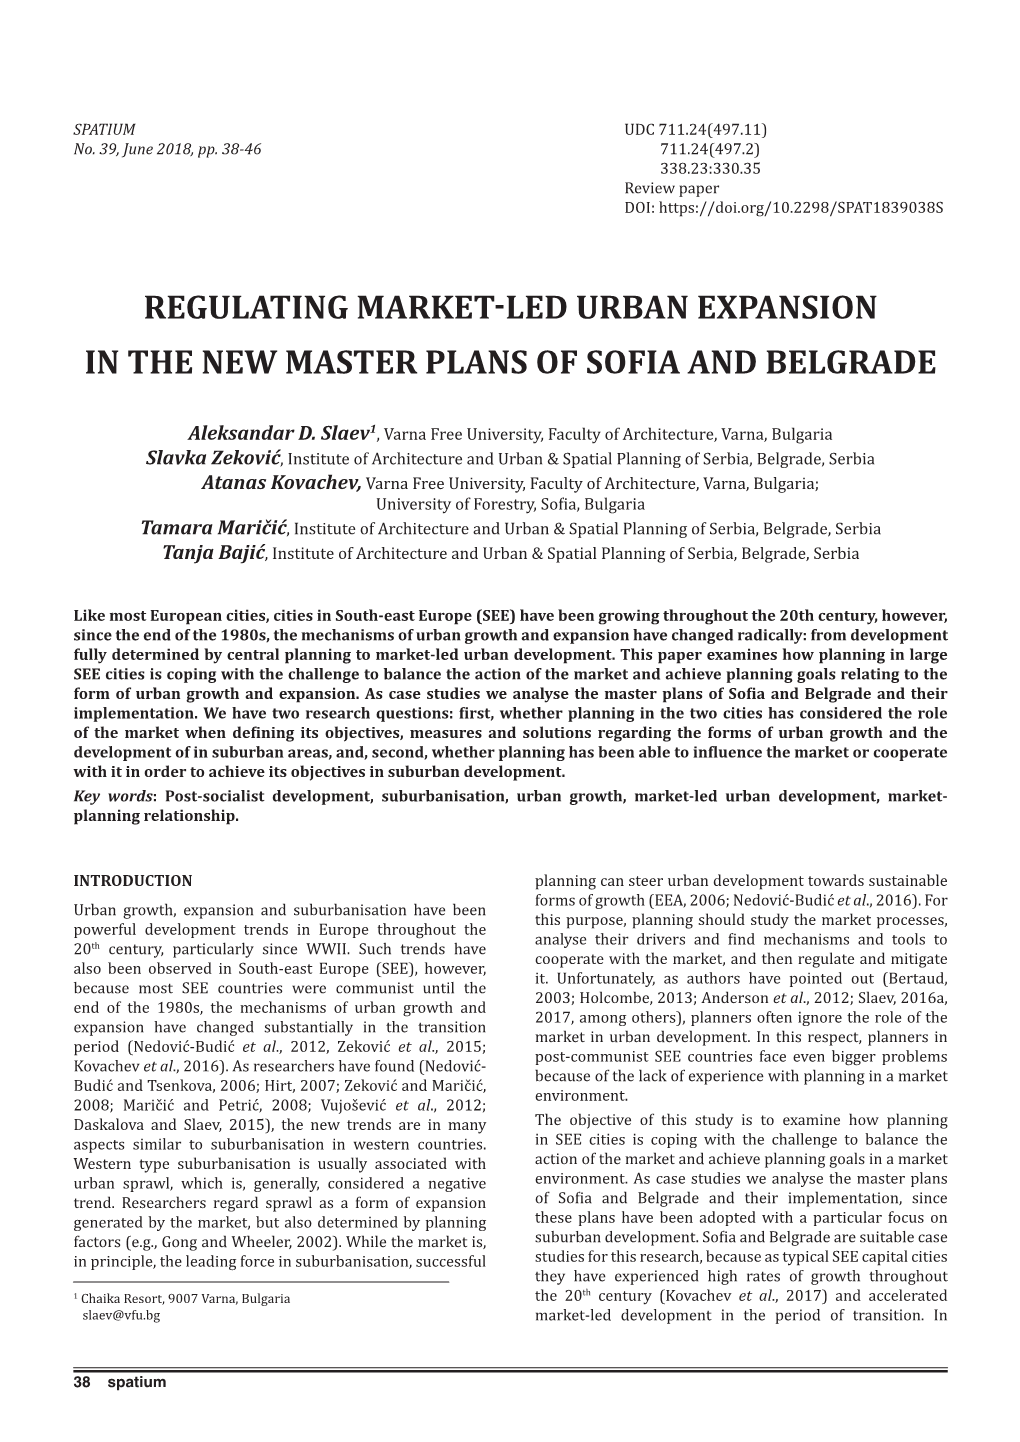 Regulating Market-Led Urban Expansion in the New Master Plans of Sofia and Belgrade